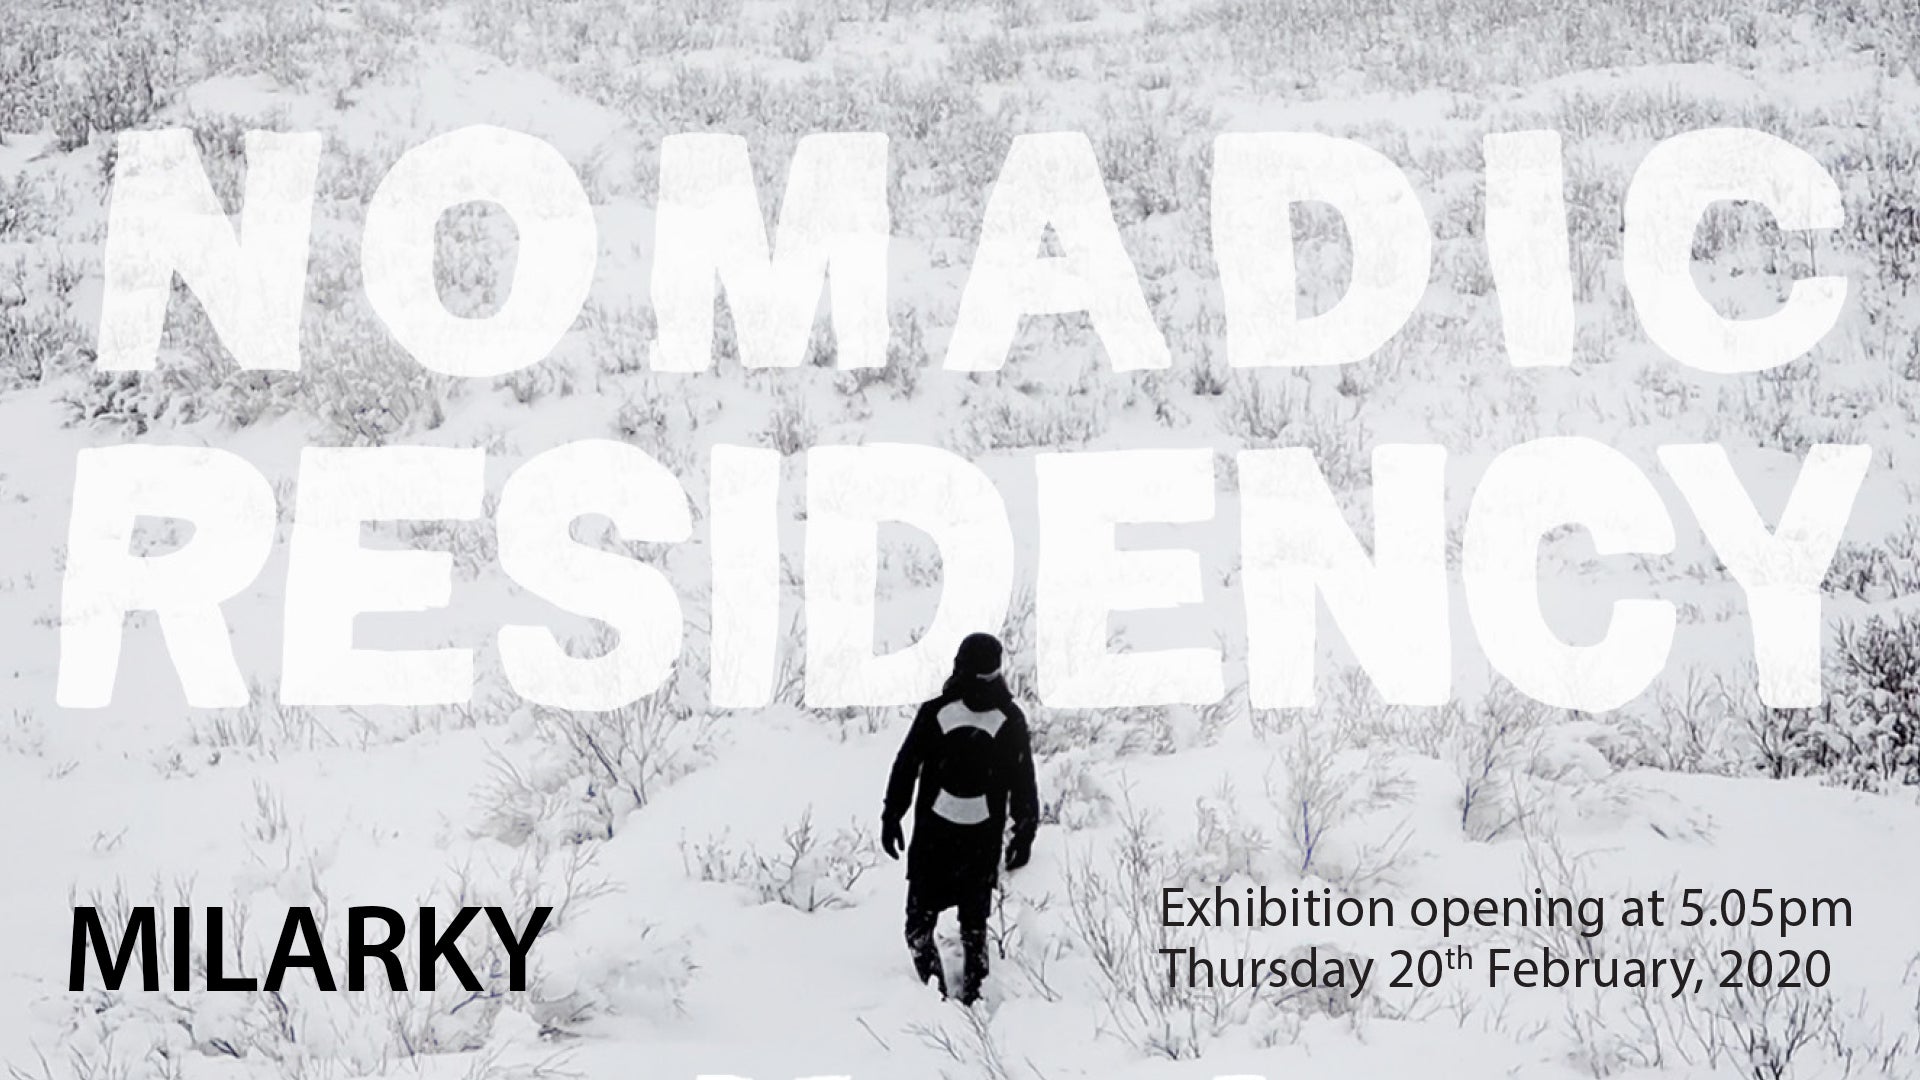 Nomadic Residency - Solo exhibition from Milarky